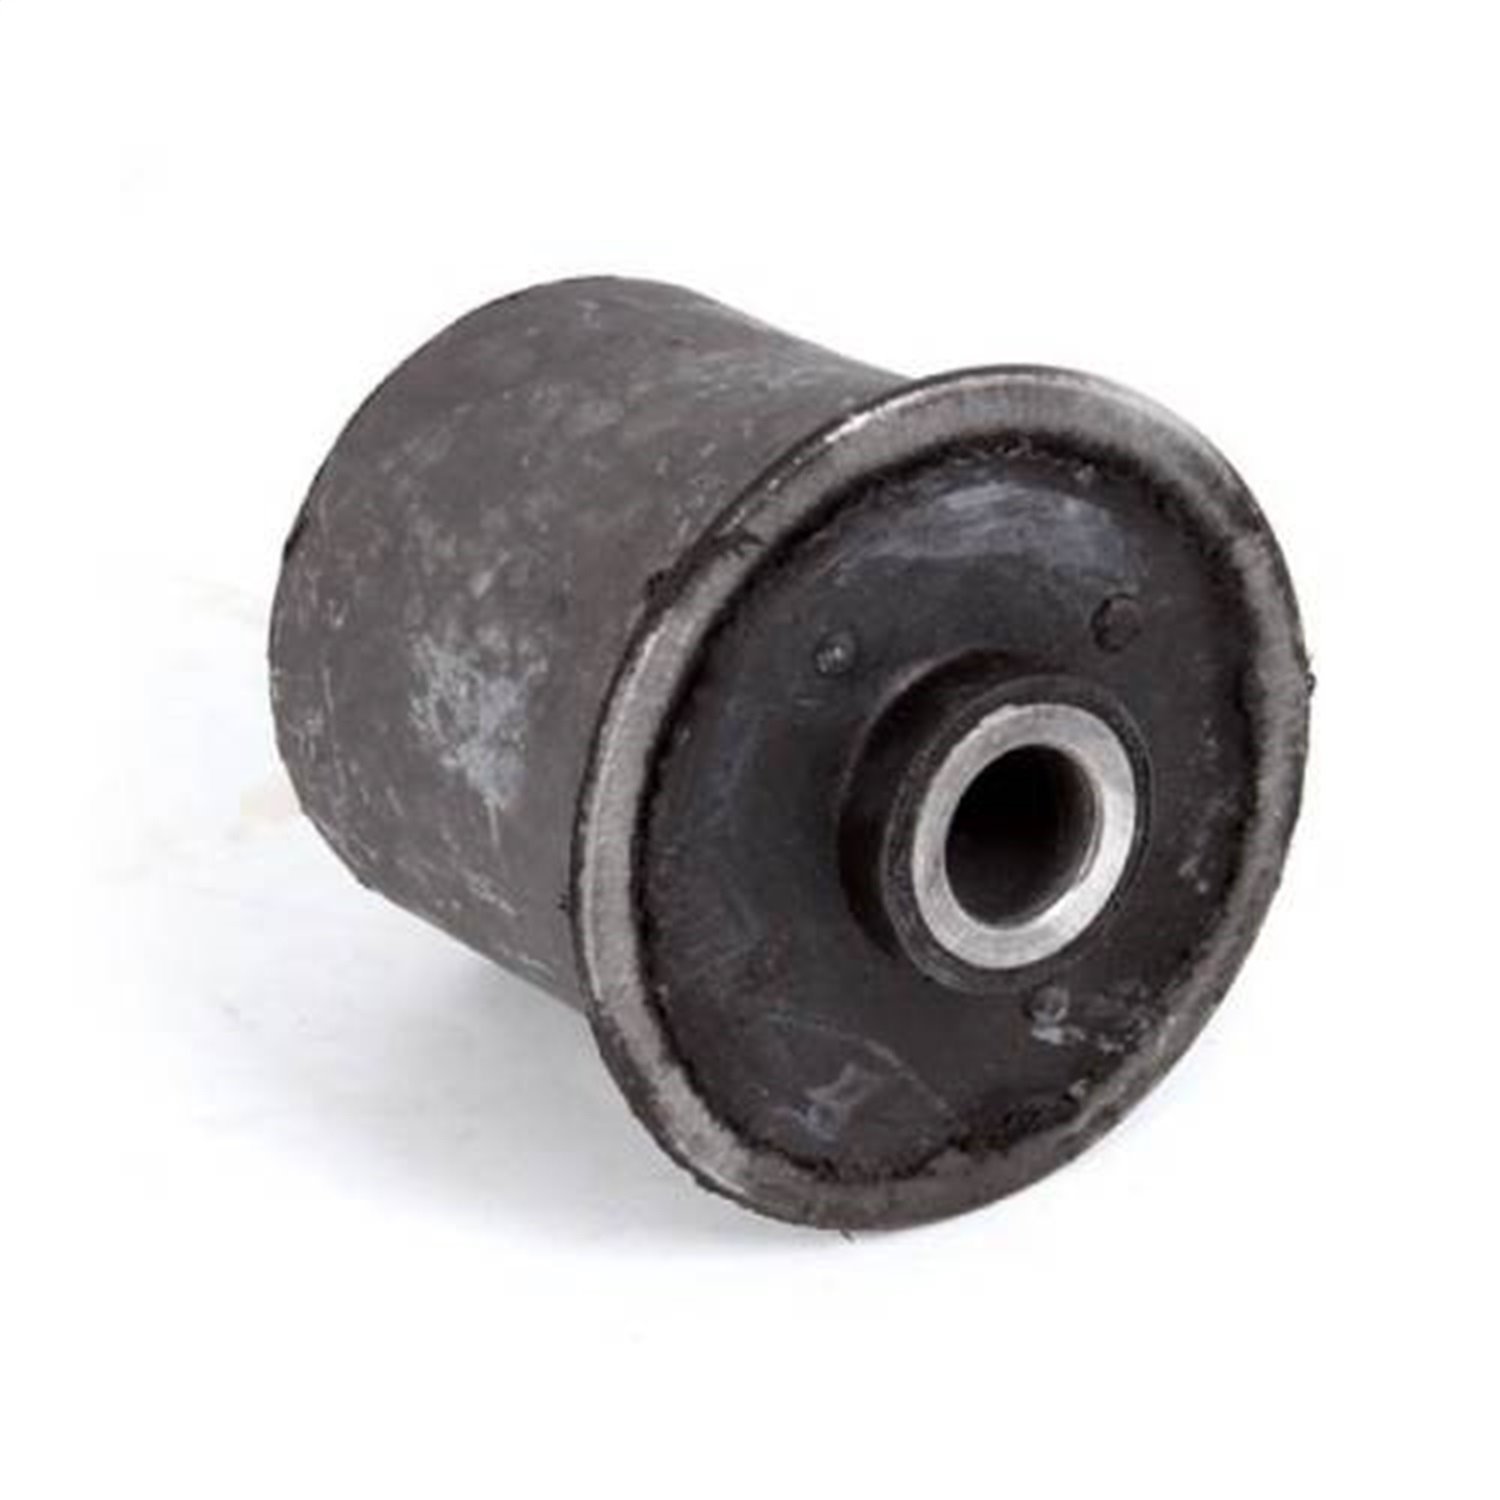 This lower control arm bushing fits the rear